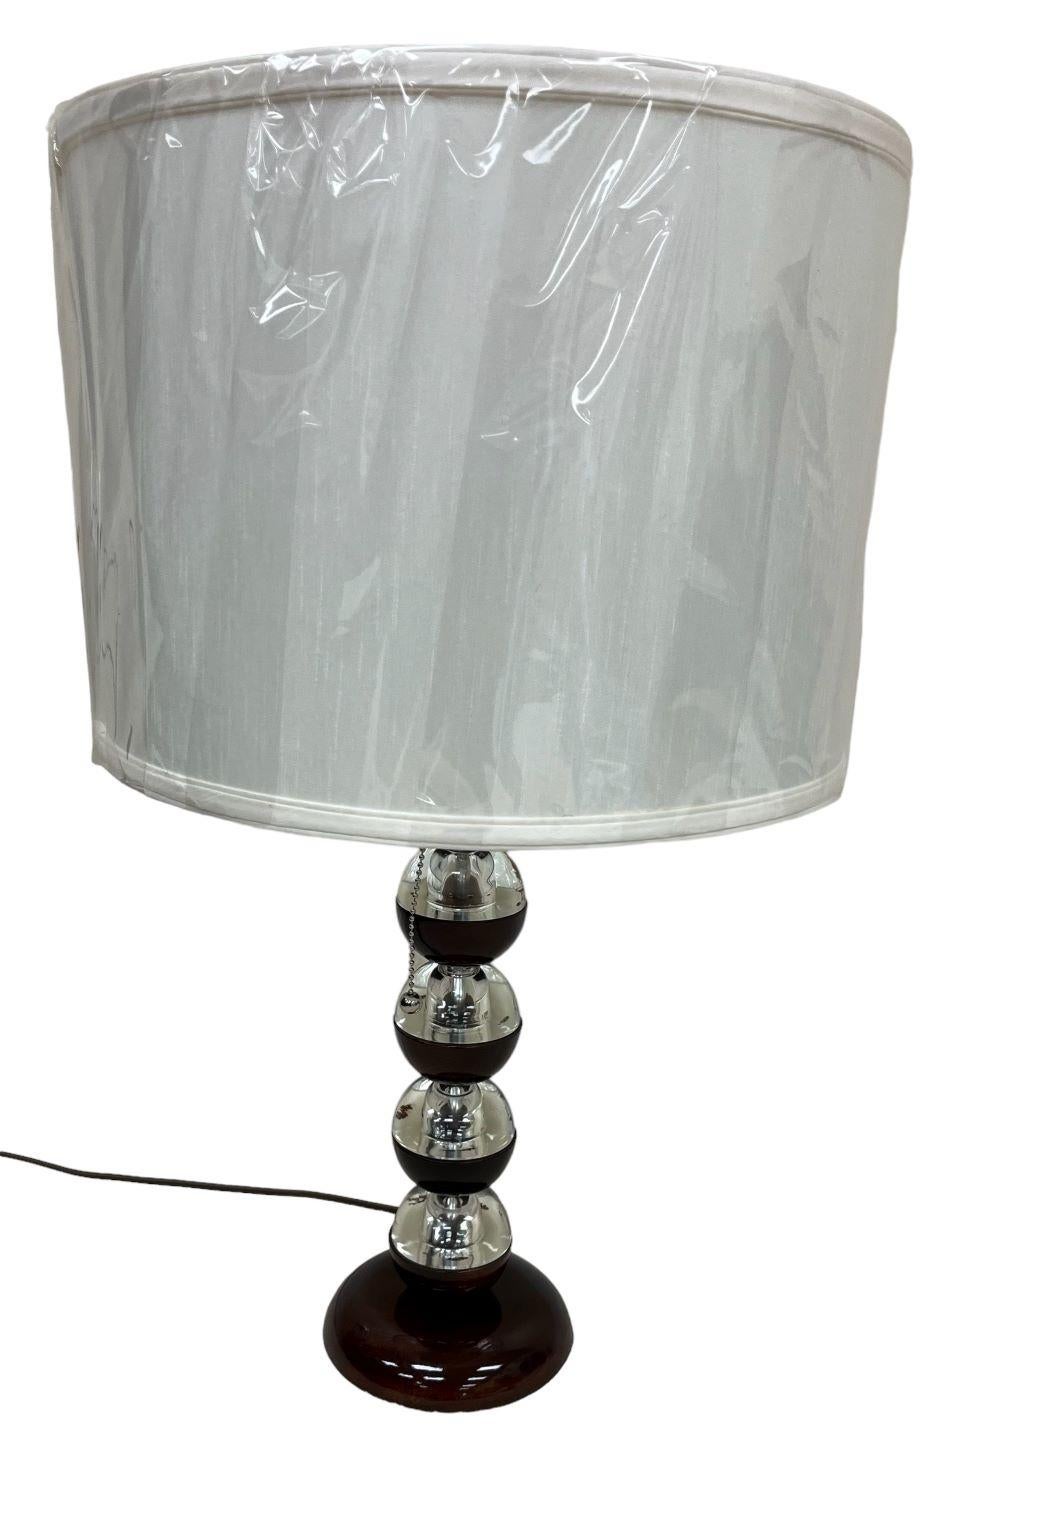 Art Deco Streamline Walnut And Solid Glass Table Lamp American Circa 1930’s For Sale 3